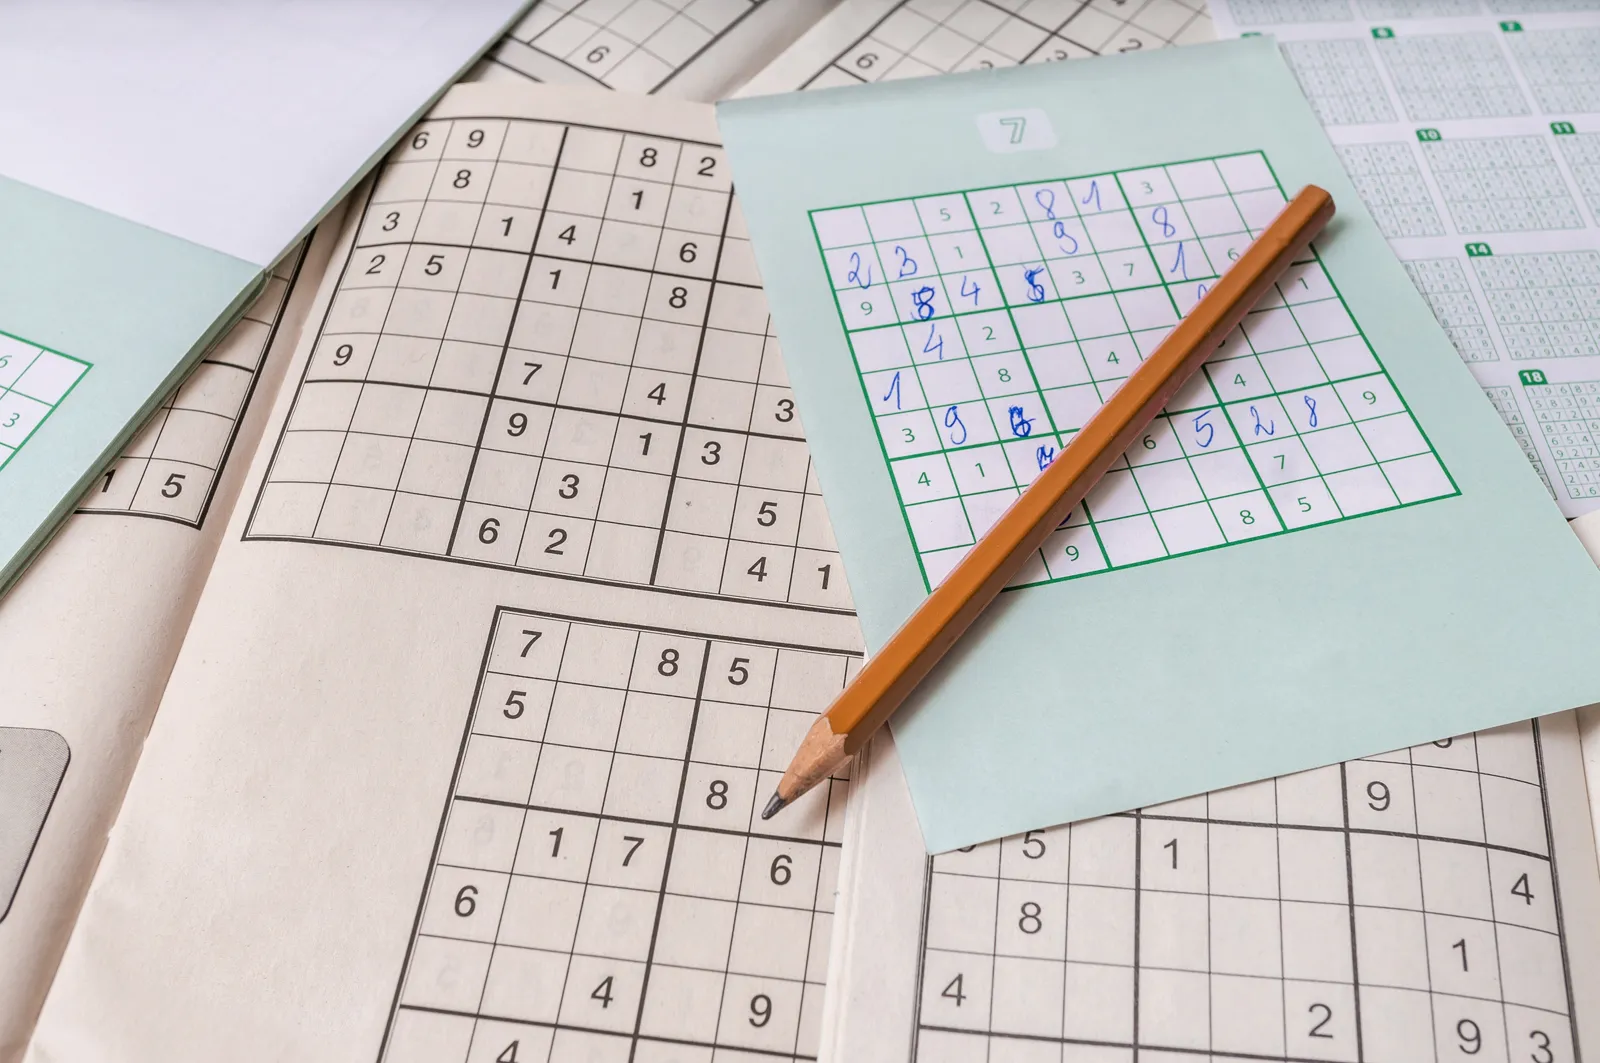 10 Sudoku Tips and Tricks That'll Help You Solve Faster - Mastering Sudoku